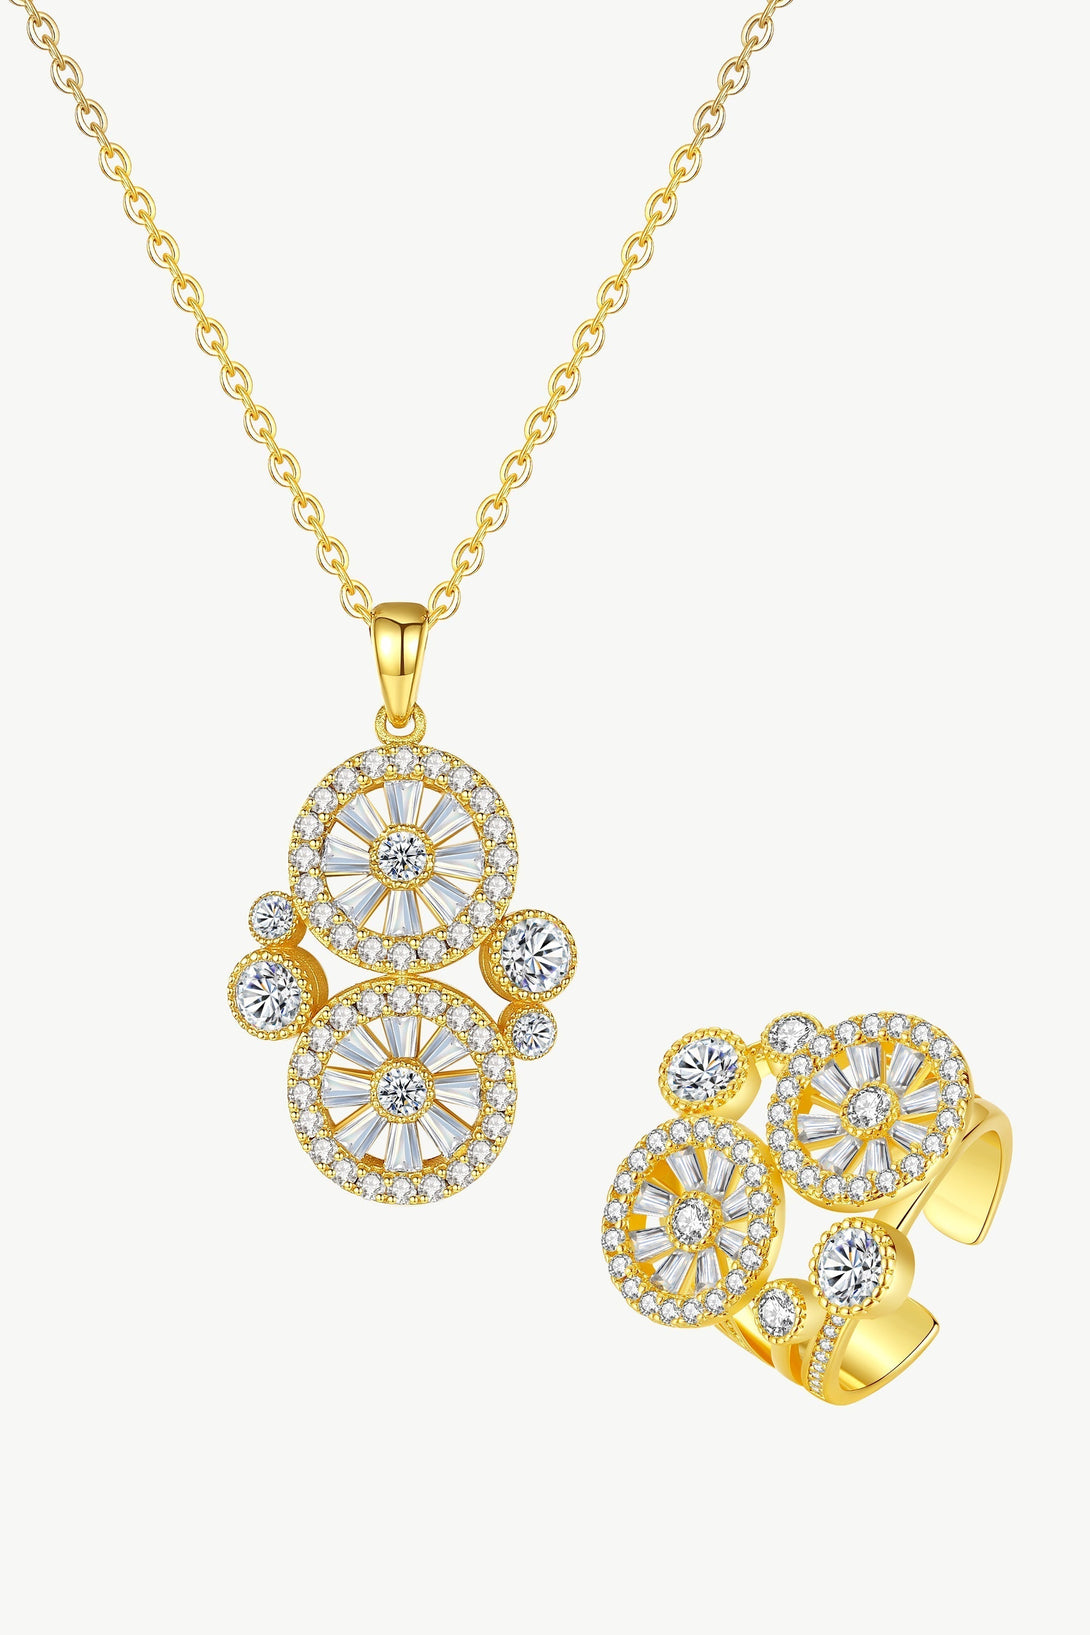 Gold Wheel of Fortune Necklace and Ring Set - Classicharms